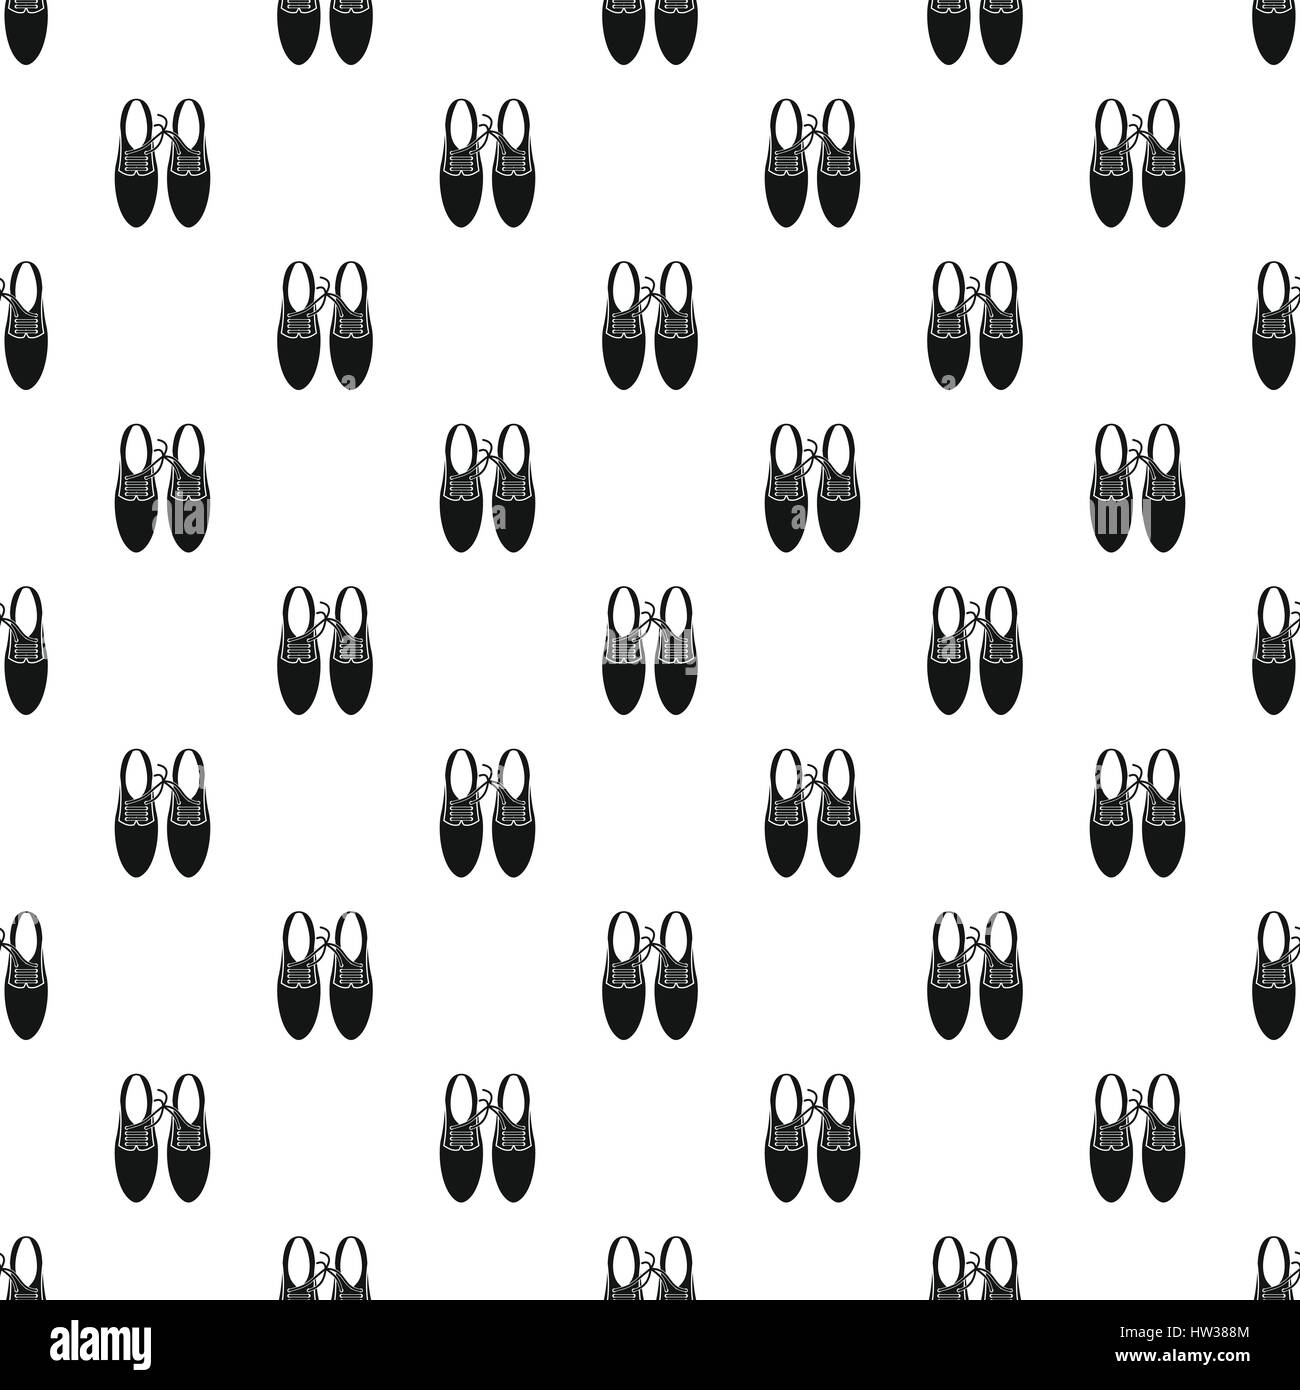 Shoes with laces tied together pattern Stock Vector